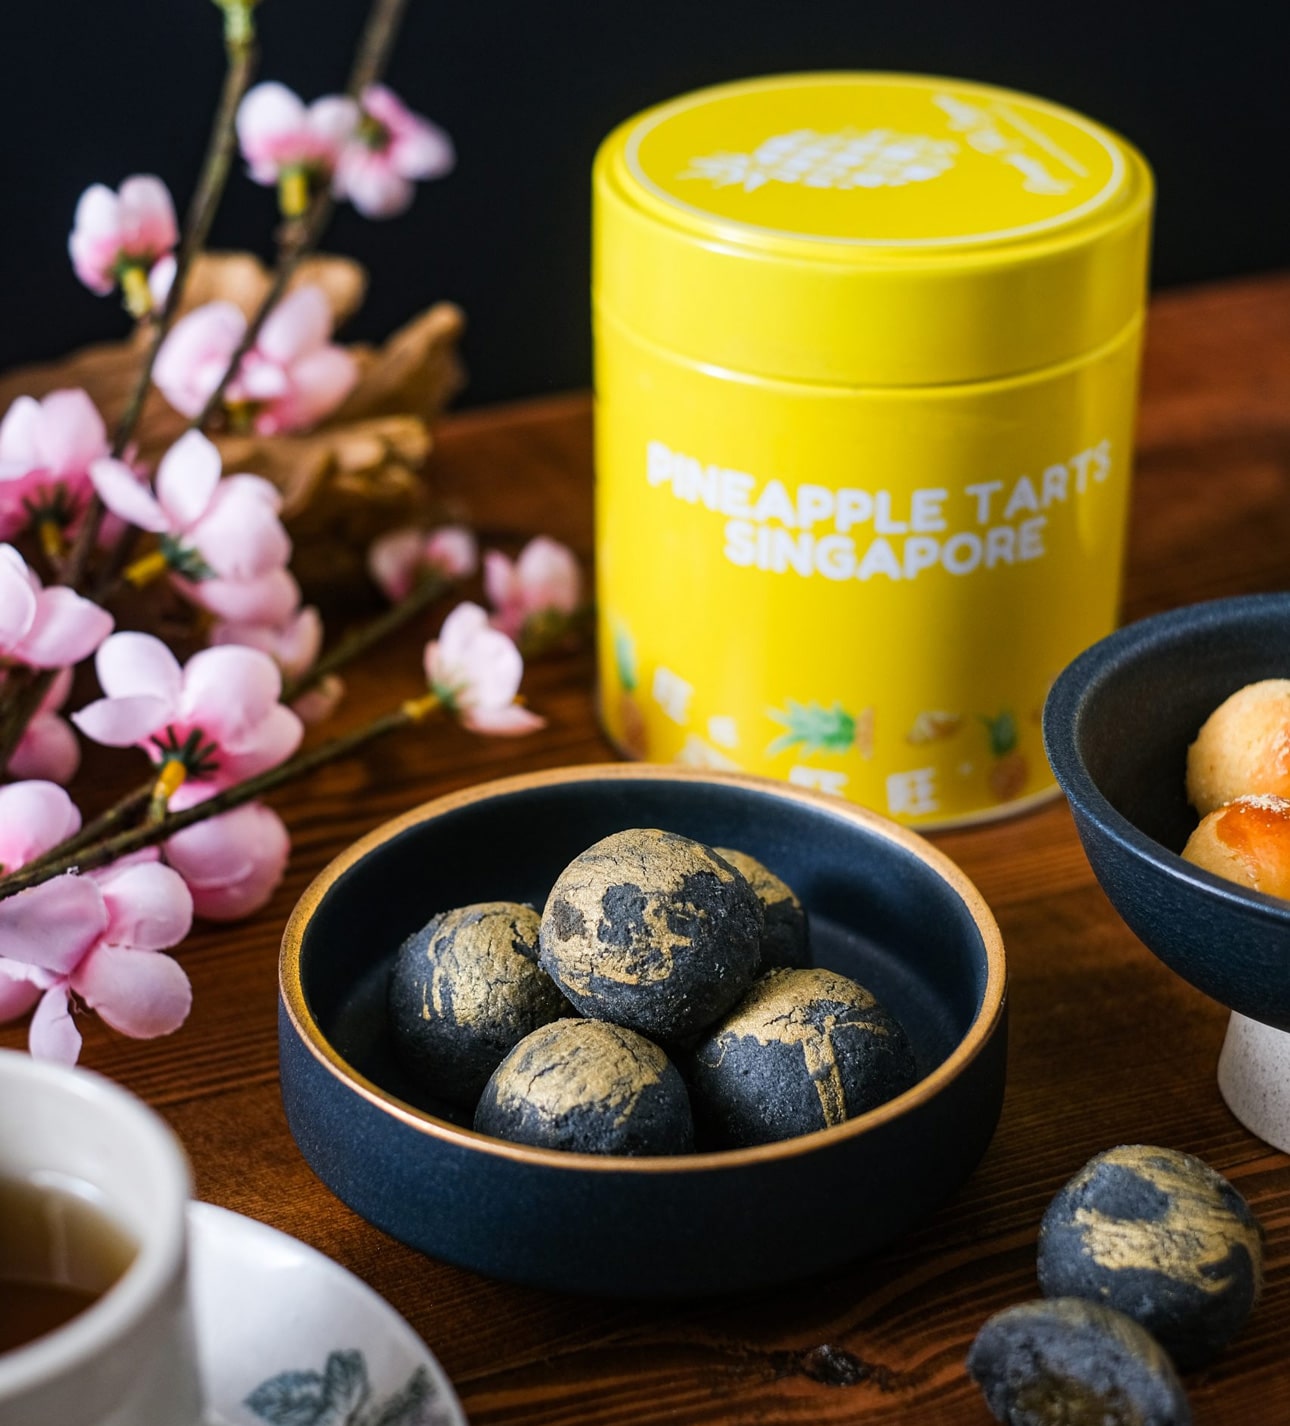 Online Bakeries To Get Unique Homemade CNY Goodies - Double Truffle - Charcoal Truffle Pineapple Tarts from Pineapple Tarts Singapore